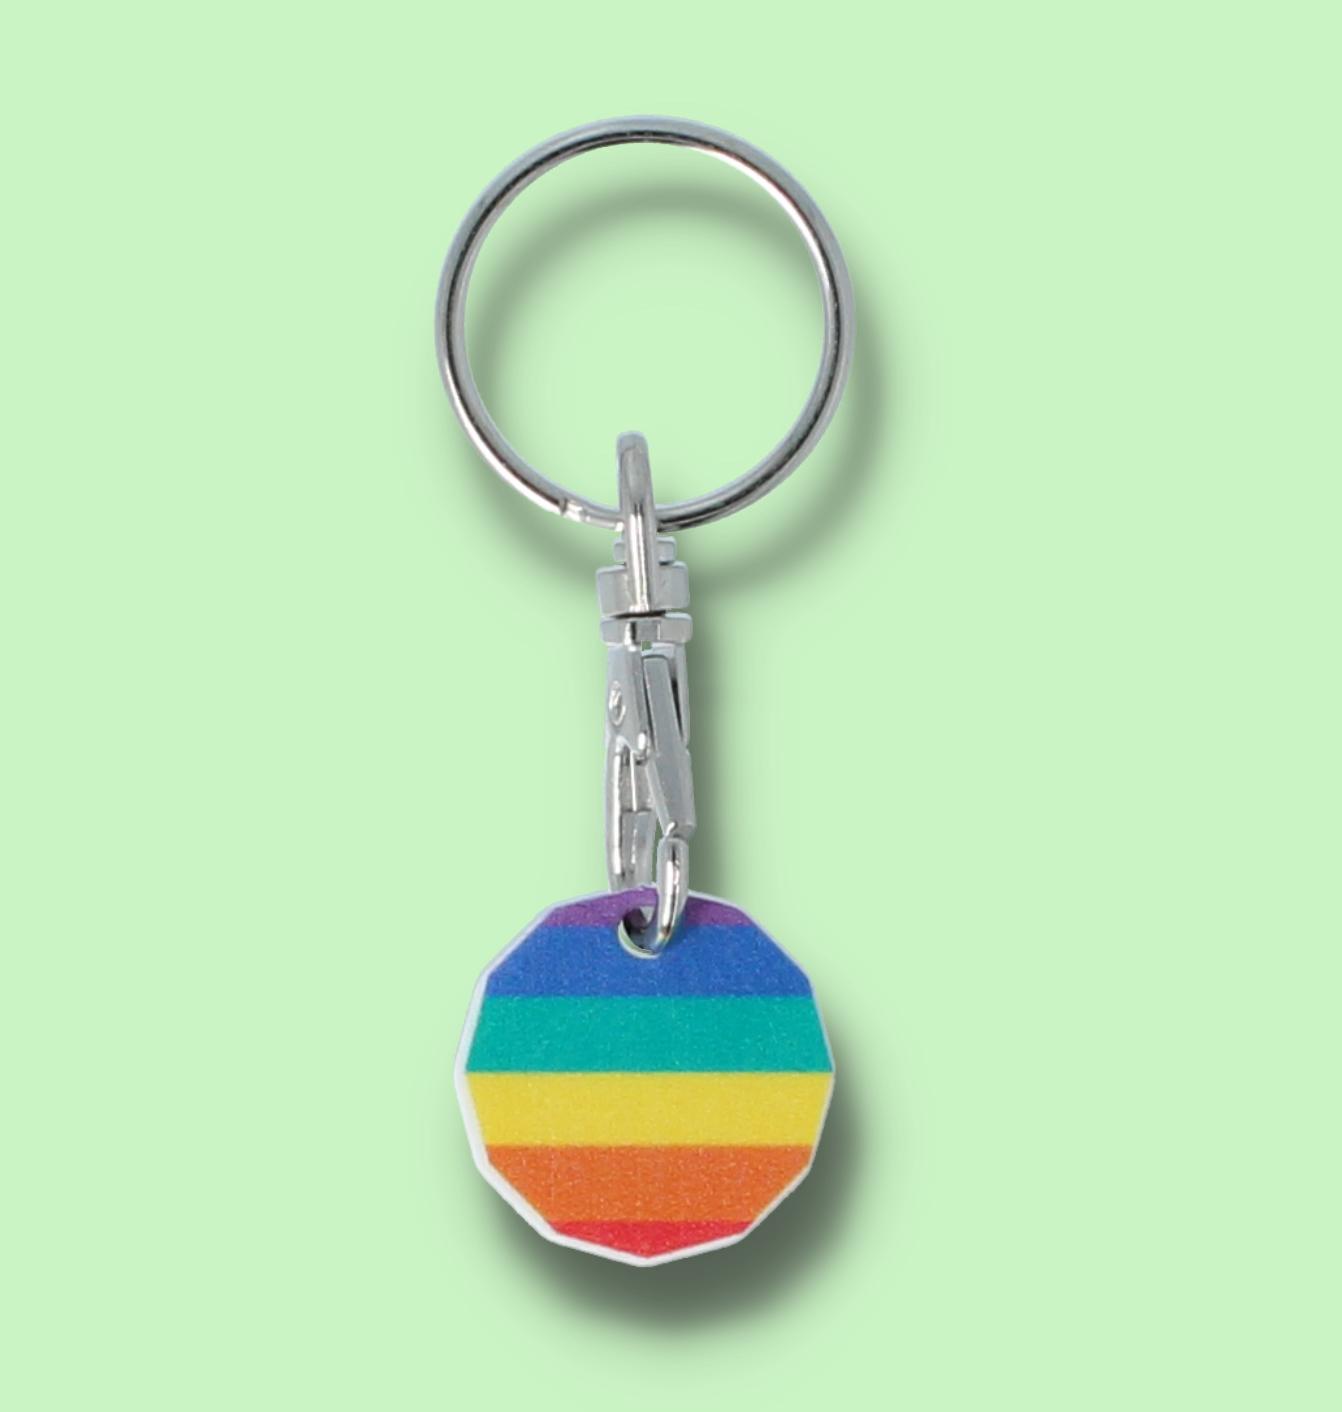 Recycled plastic trolley coin key chain